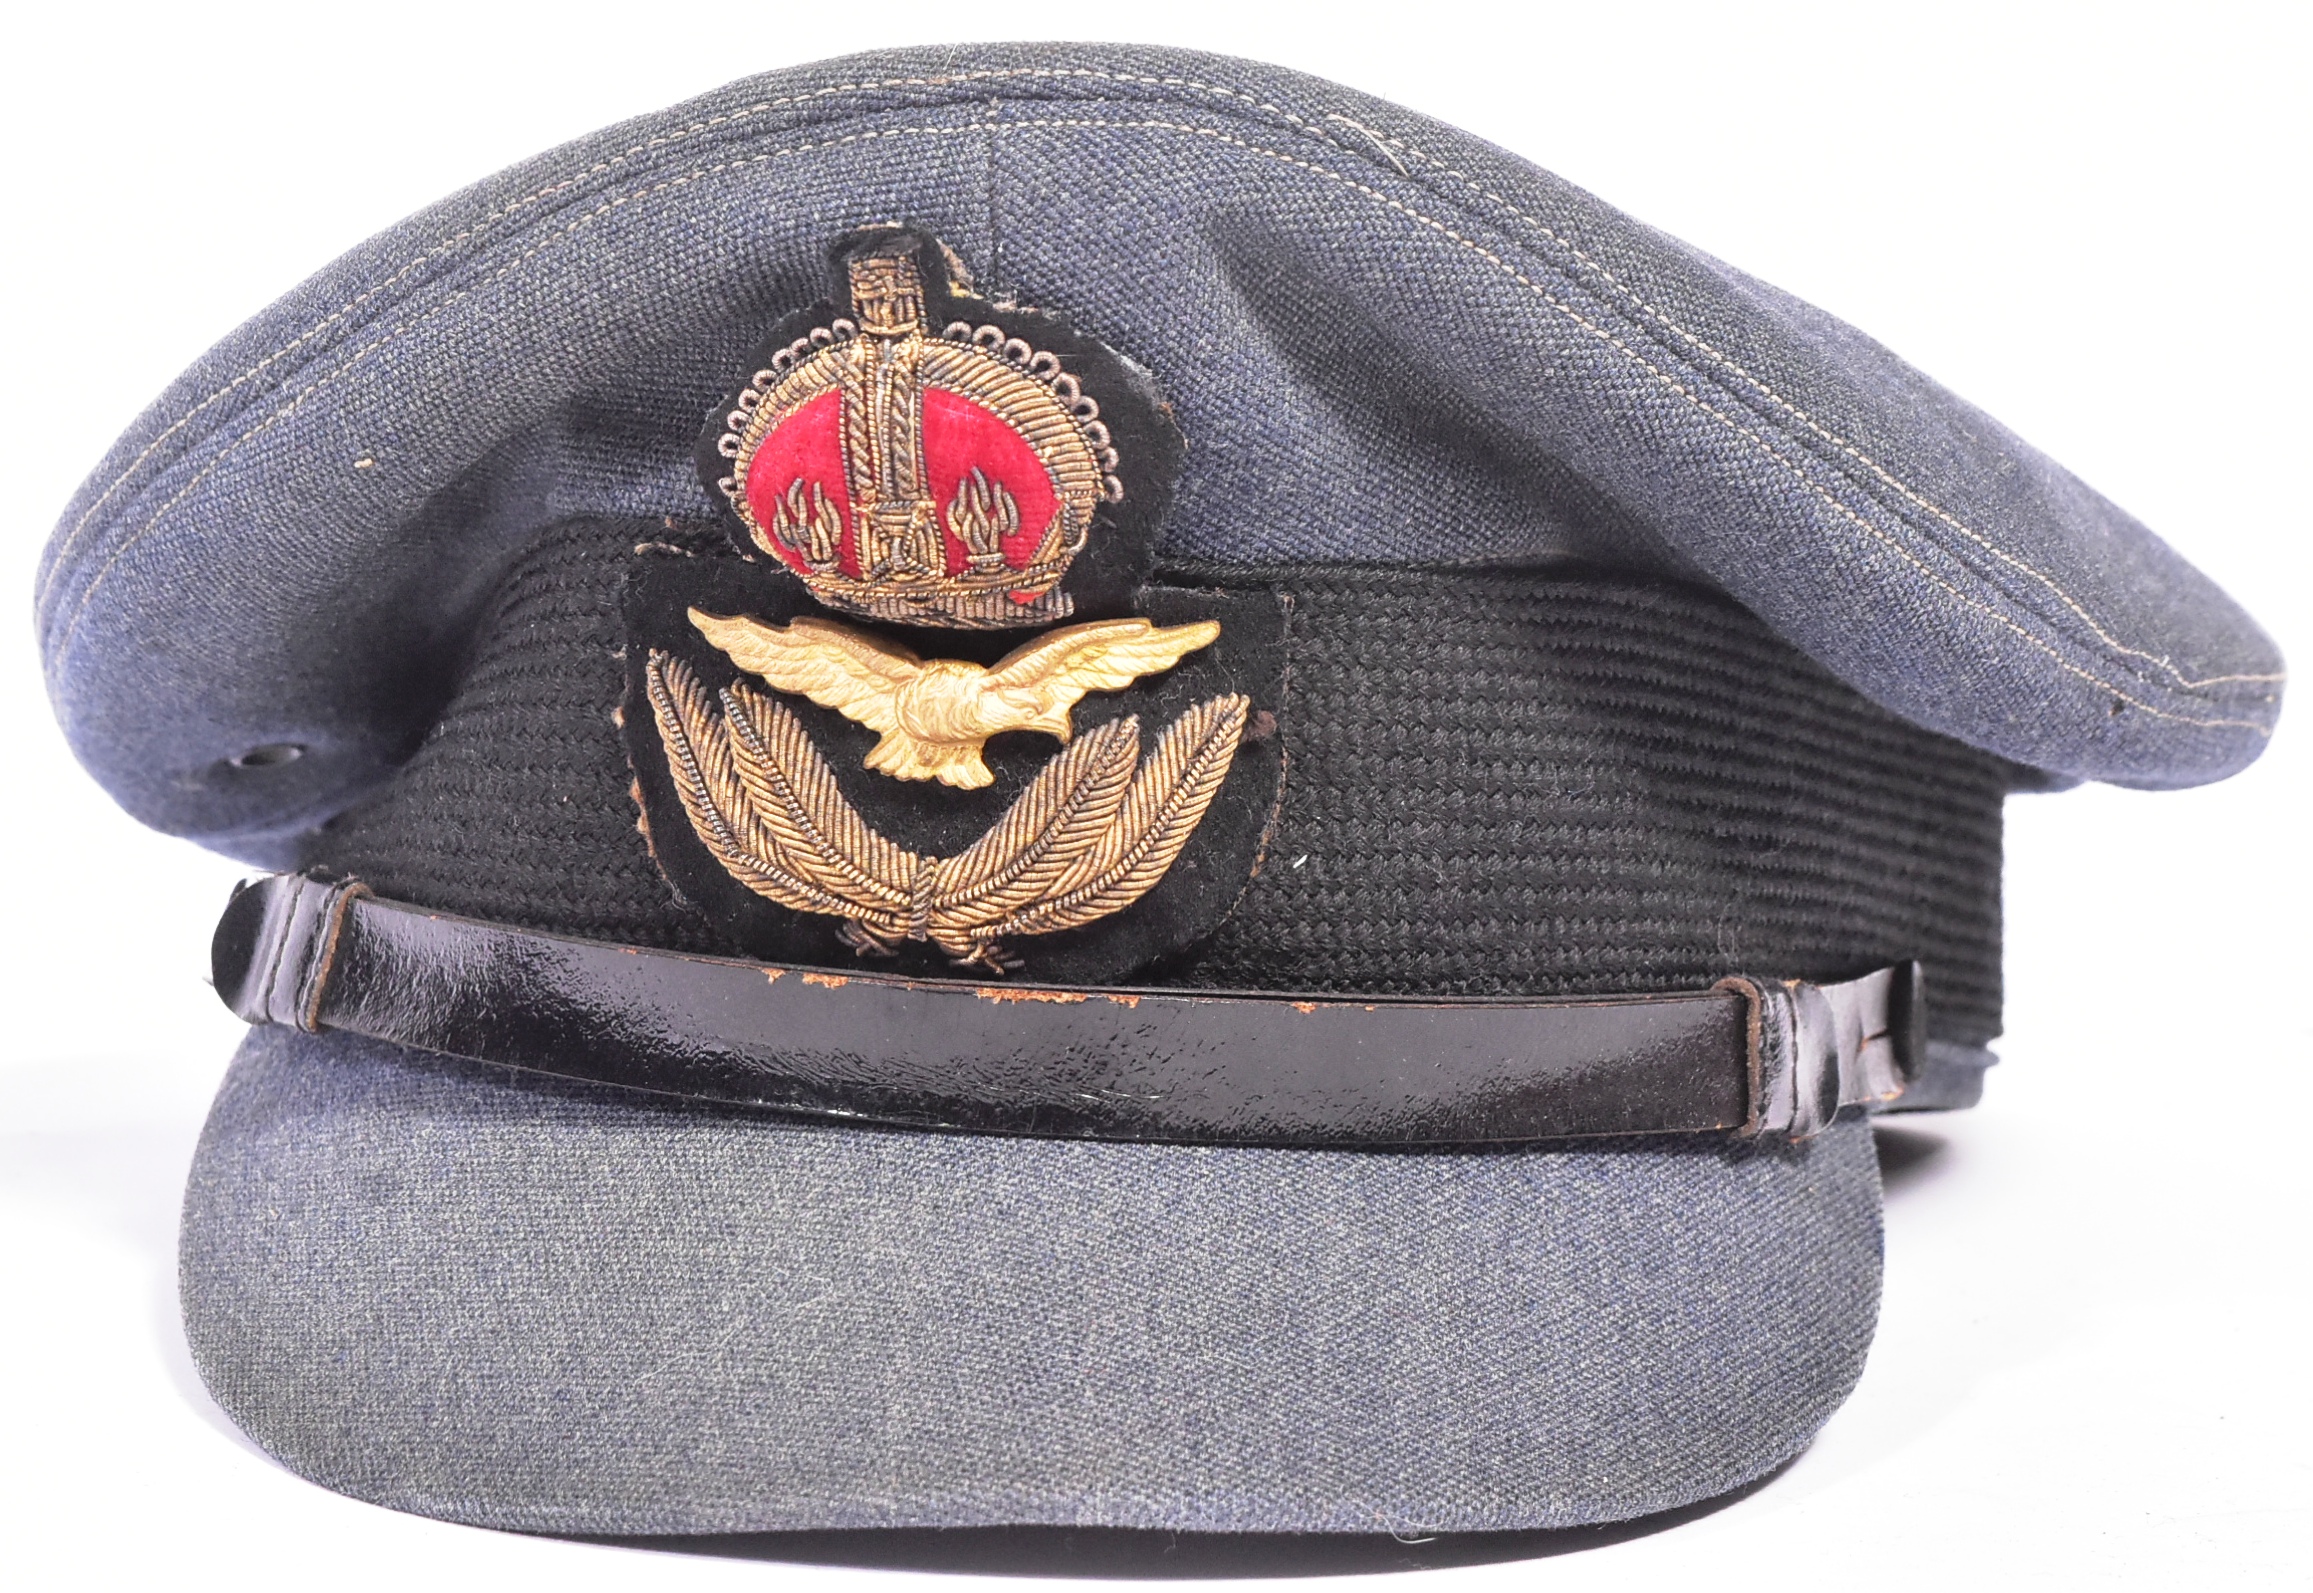 WWII SECOND WORLD WAR BRITISH RAF OFFICERS PEAKED CAP - Image 2 of 5